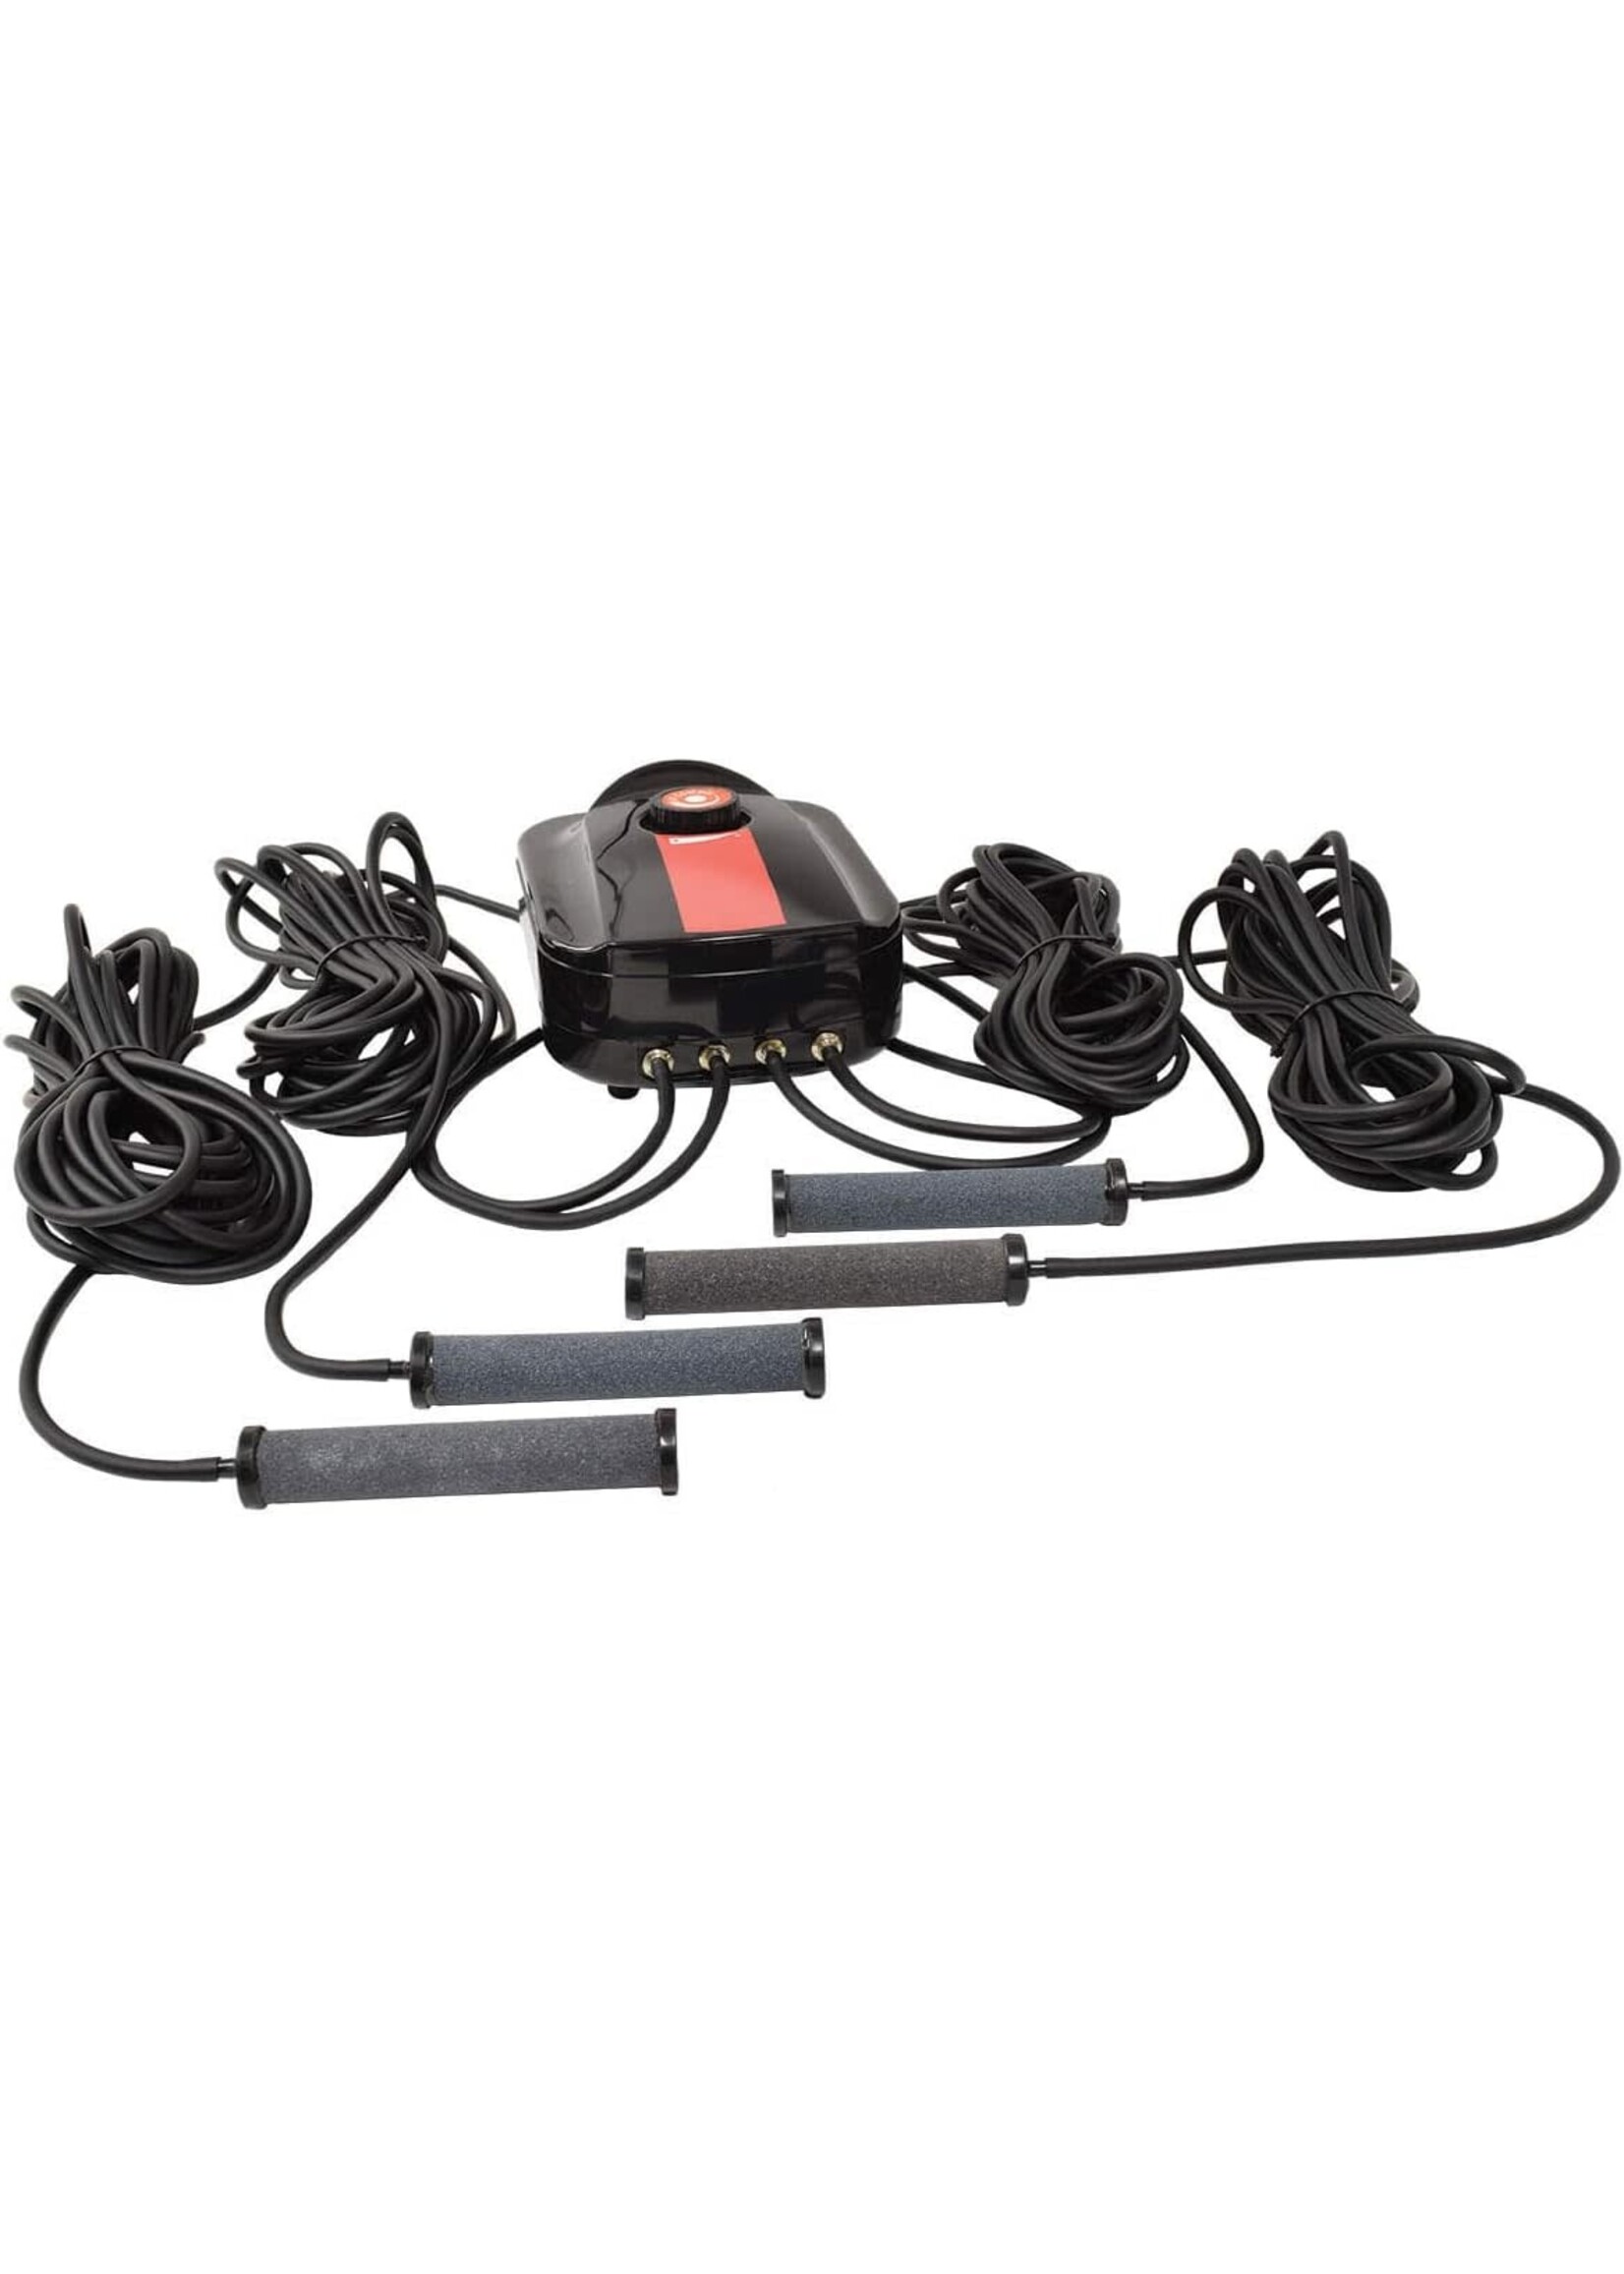 EasyPro COMPACT AERATION SERIES - QUAD OUTLET COMPLETE KIT